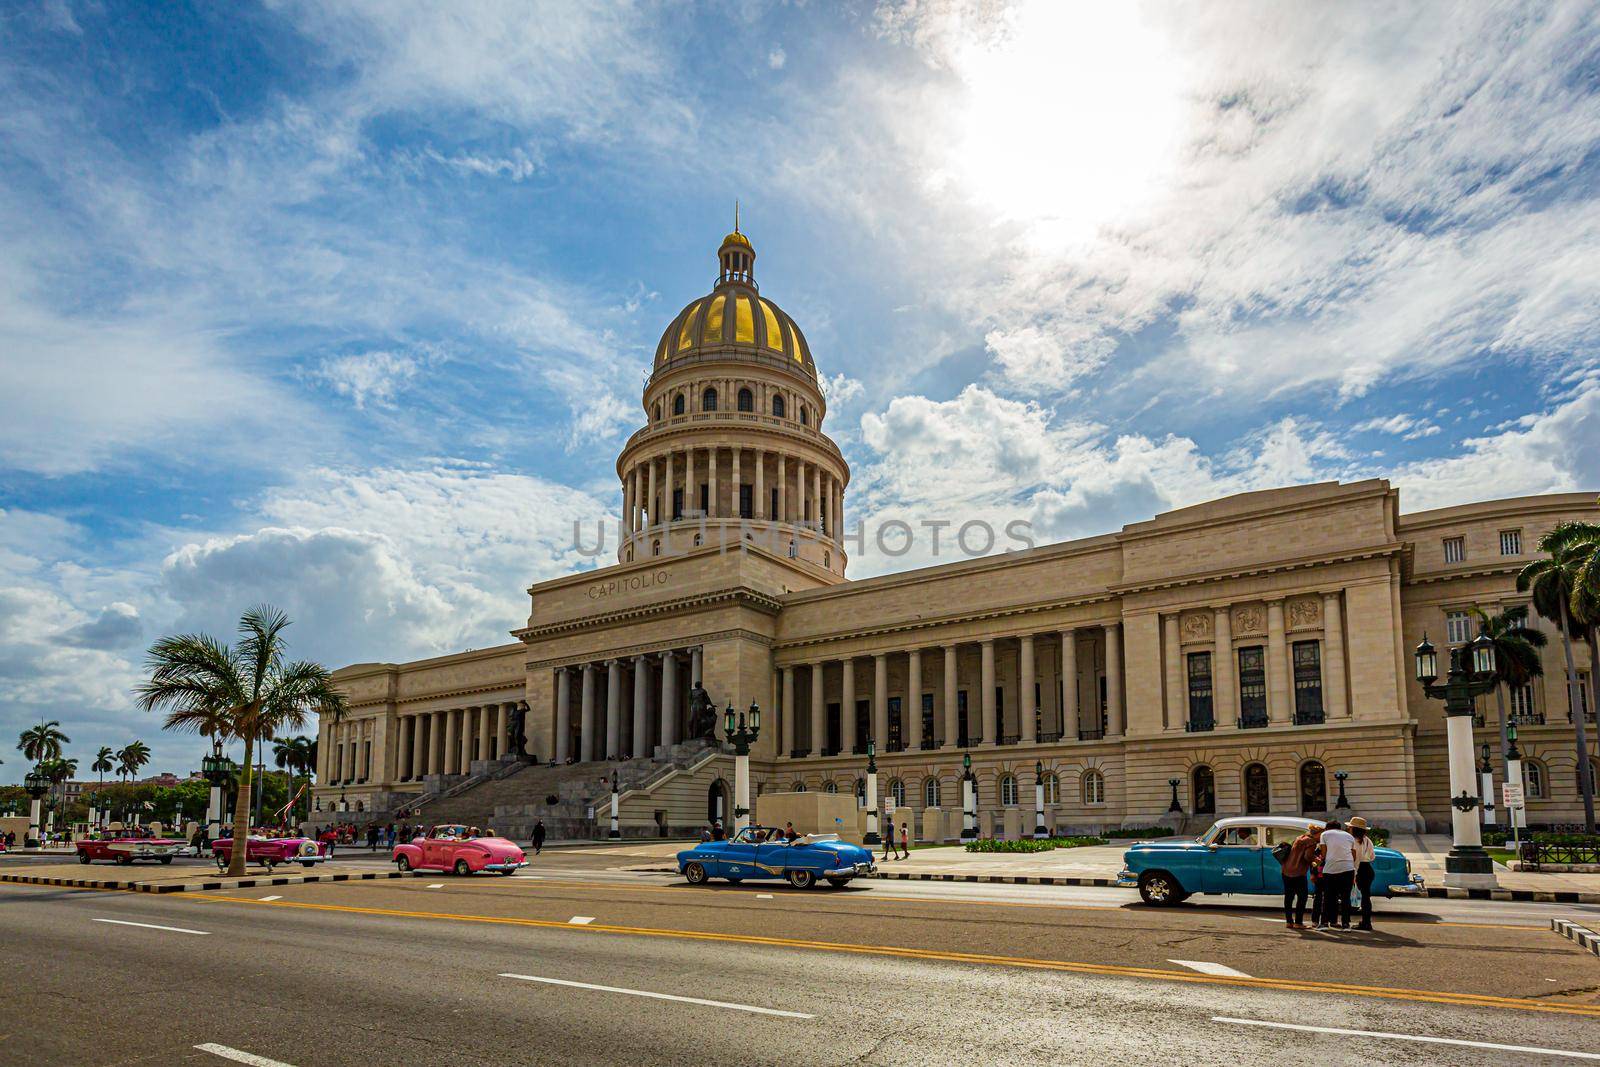 El Capitolio, or the National Capitol Building (Capitolio Nacional de La Habana), is one of the most visited sites in Havana, capital of Cuba